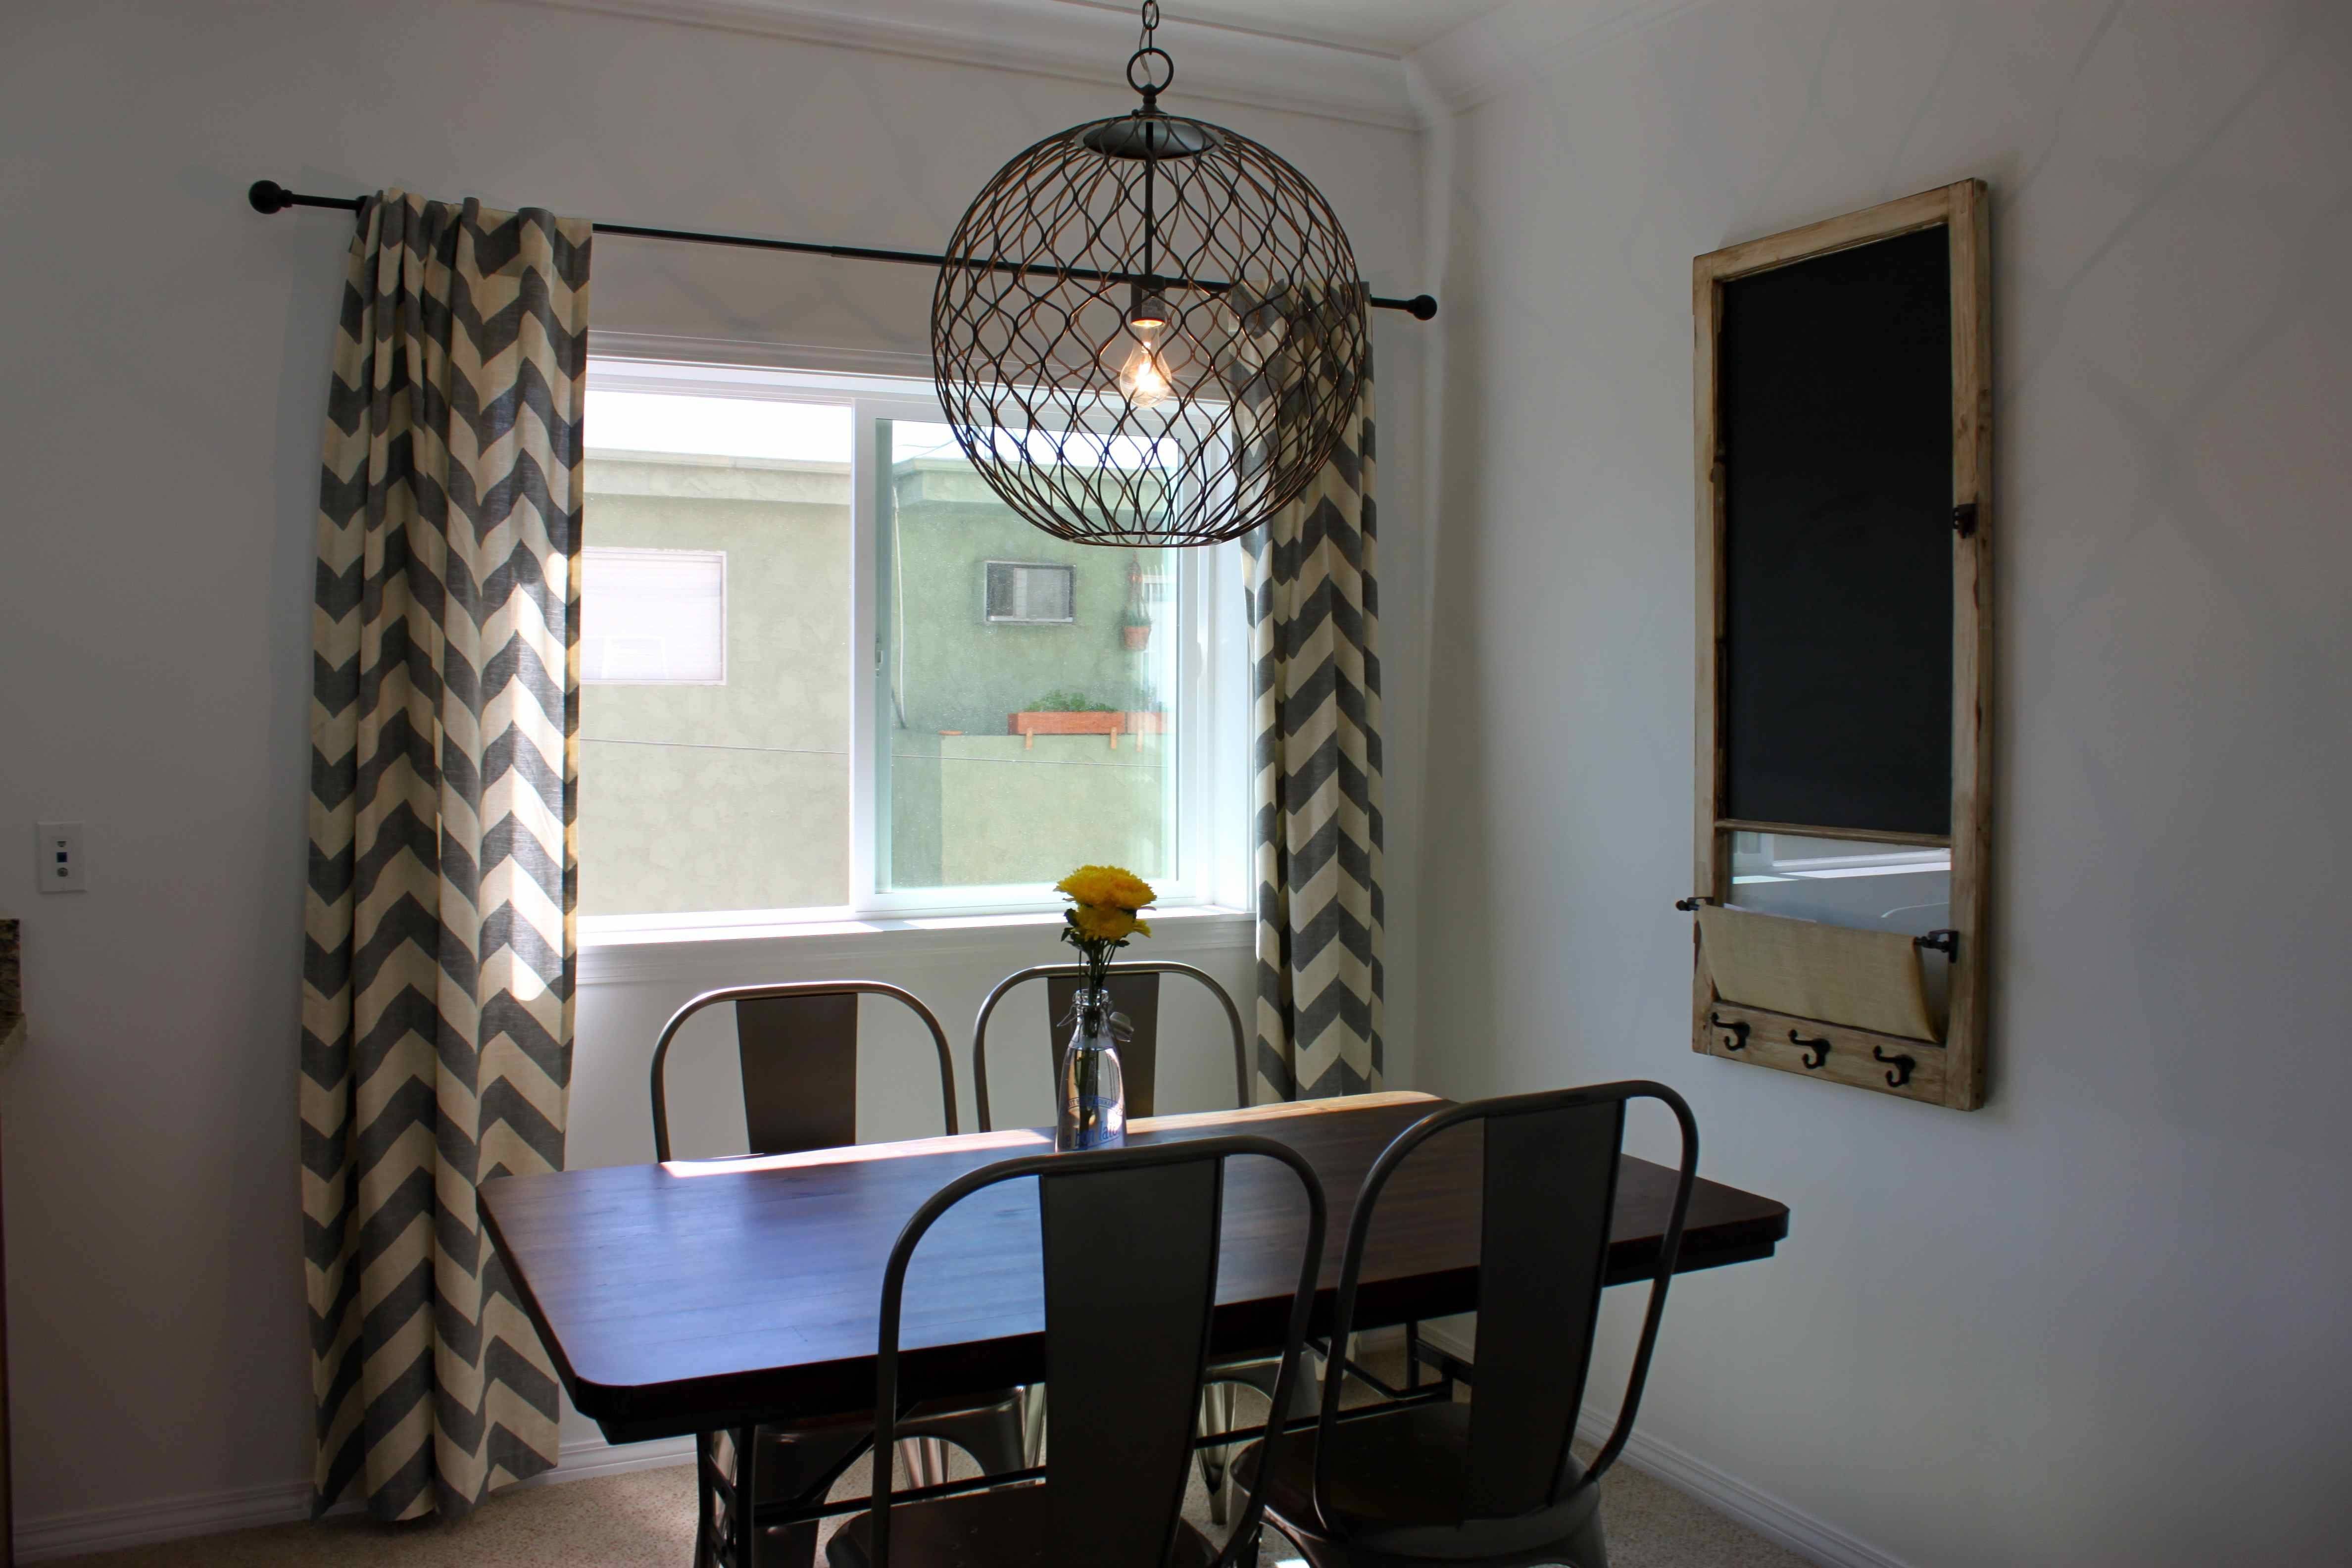 My Dining Room Makeover  This Beautiful Day With Crate And Barrel Pendant Lights (View 11 of 15)